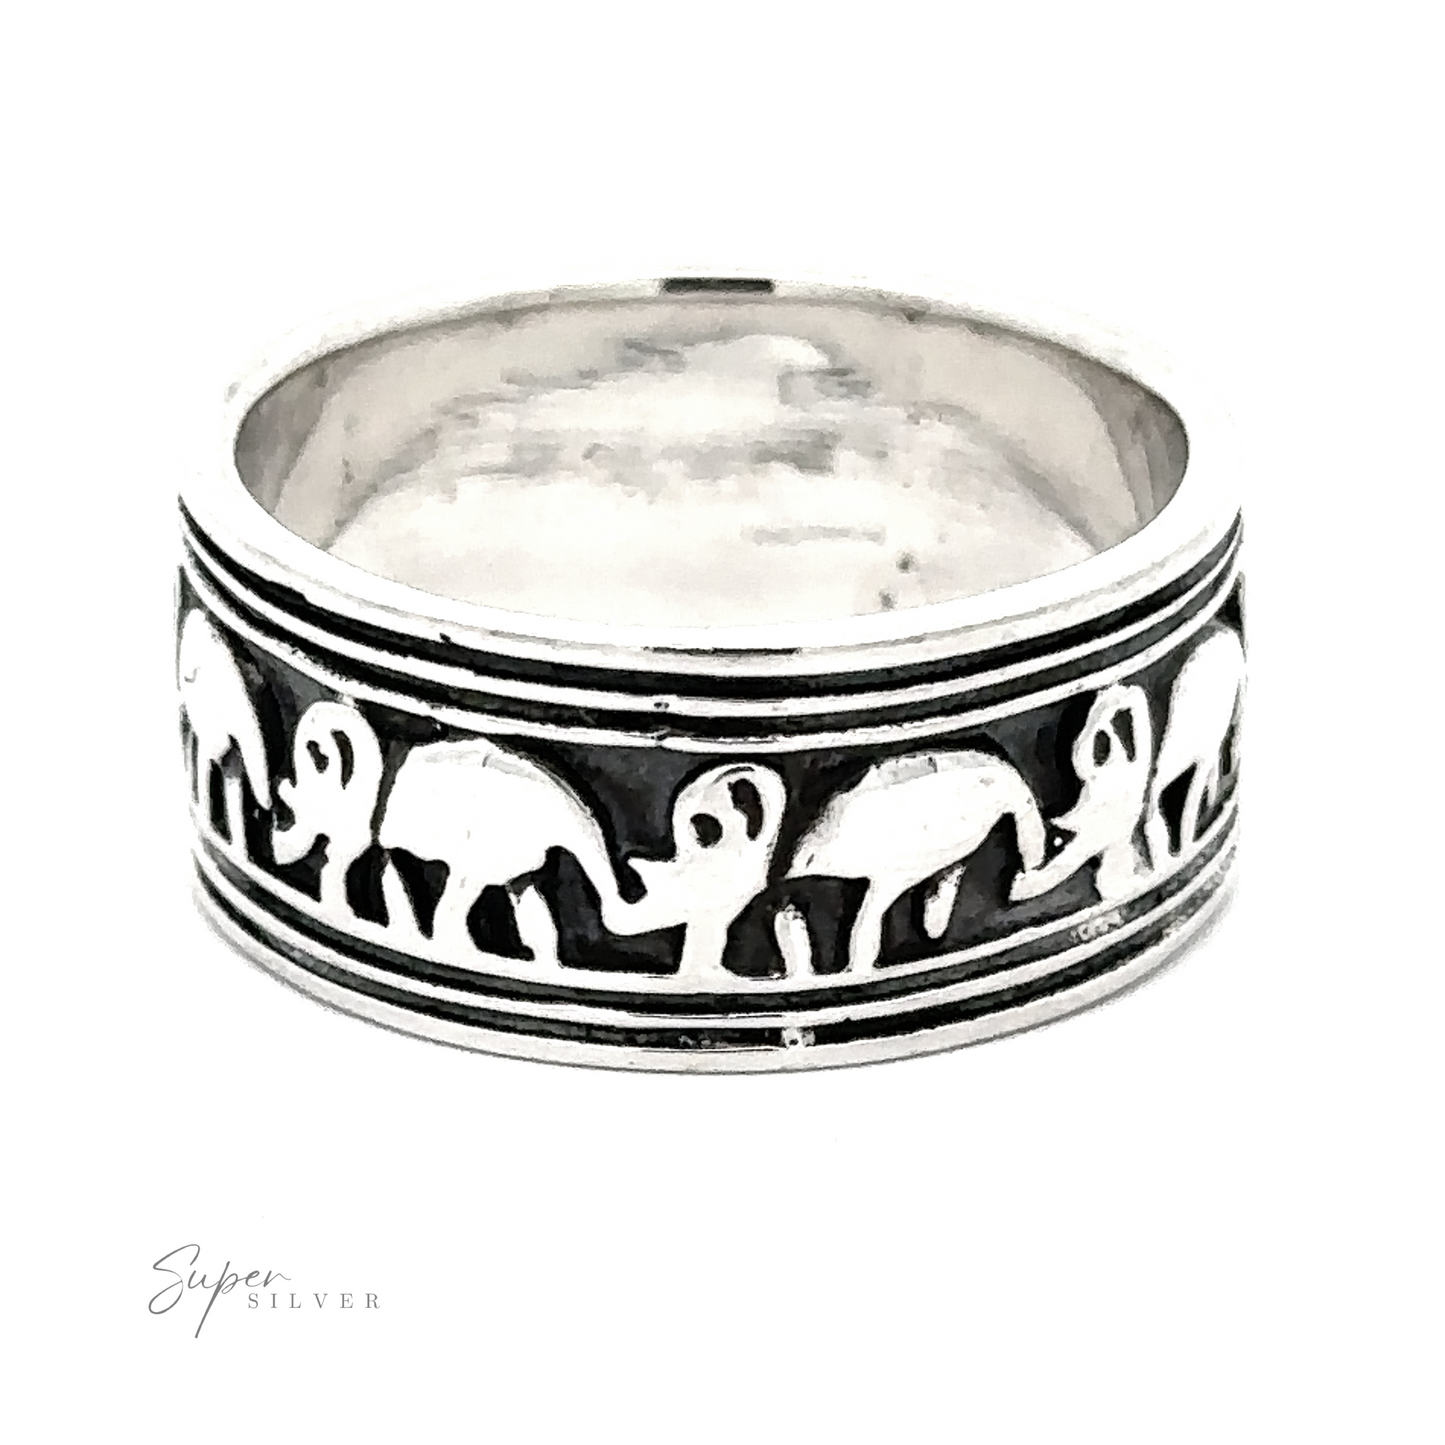 Silver Marching Elephants Band 925 sterling silver ring with elephant design on white background.